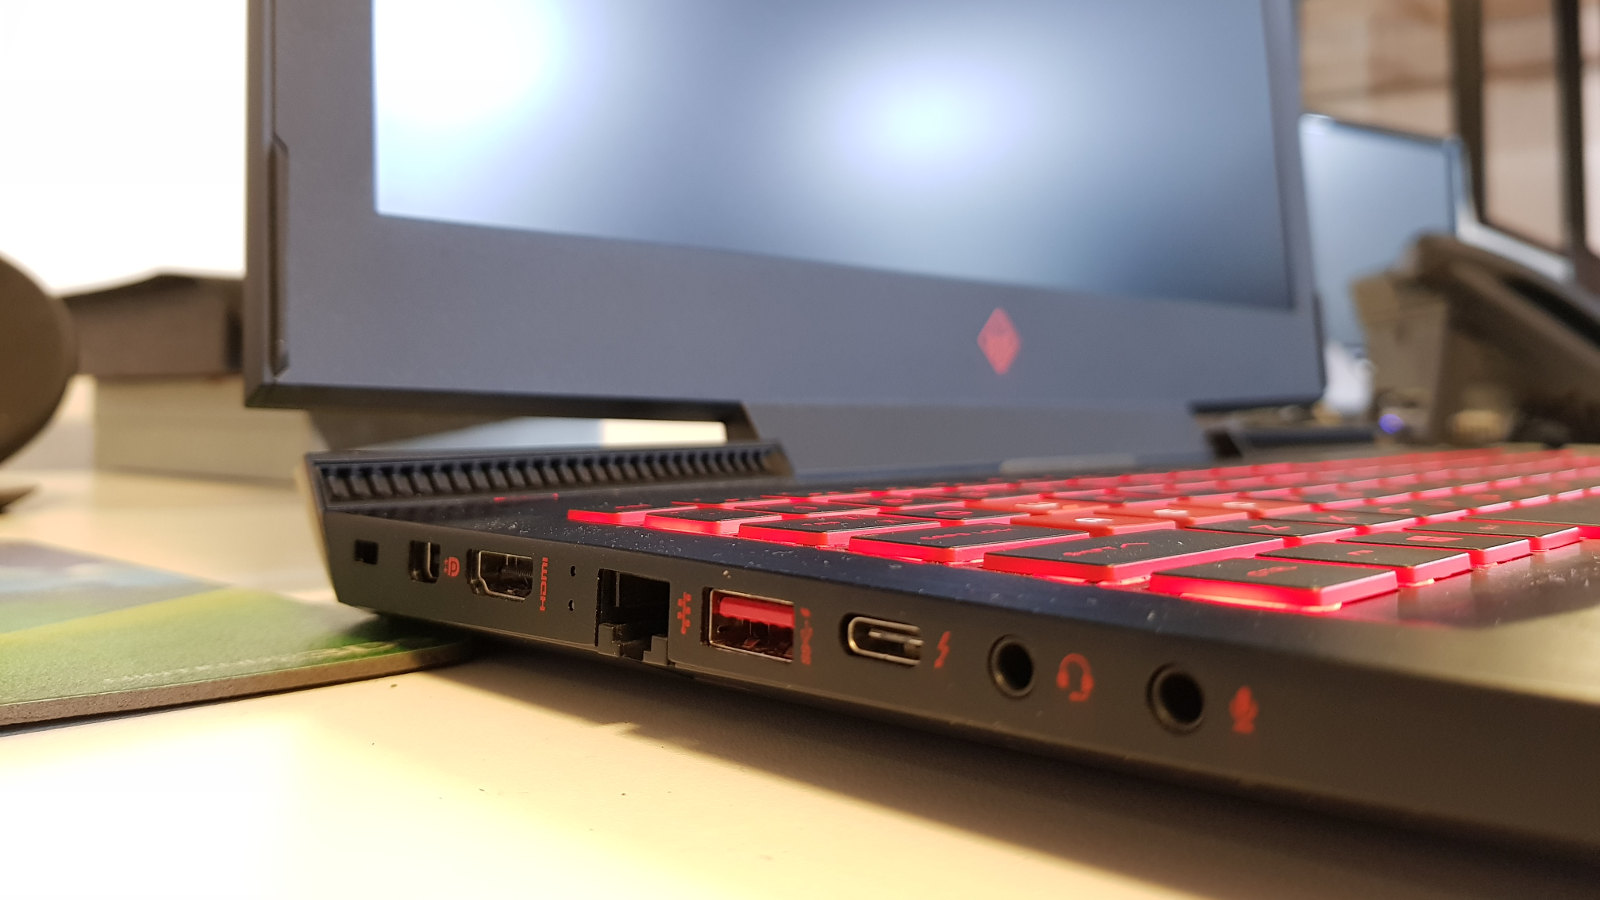 HP Omen 15 review (2017): A gaming laptop for everyone